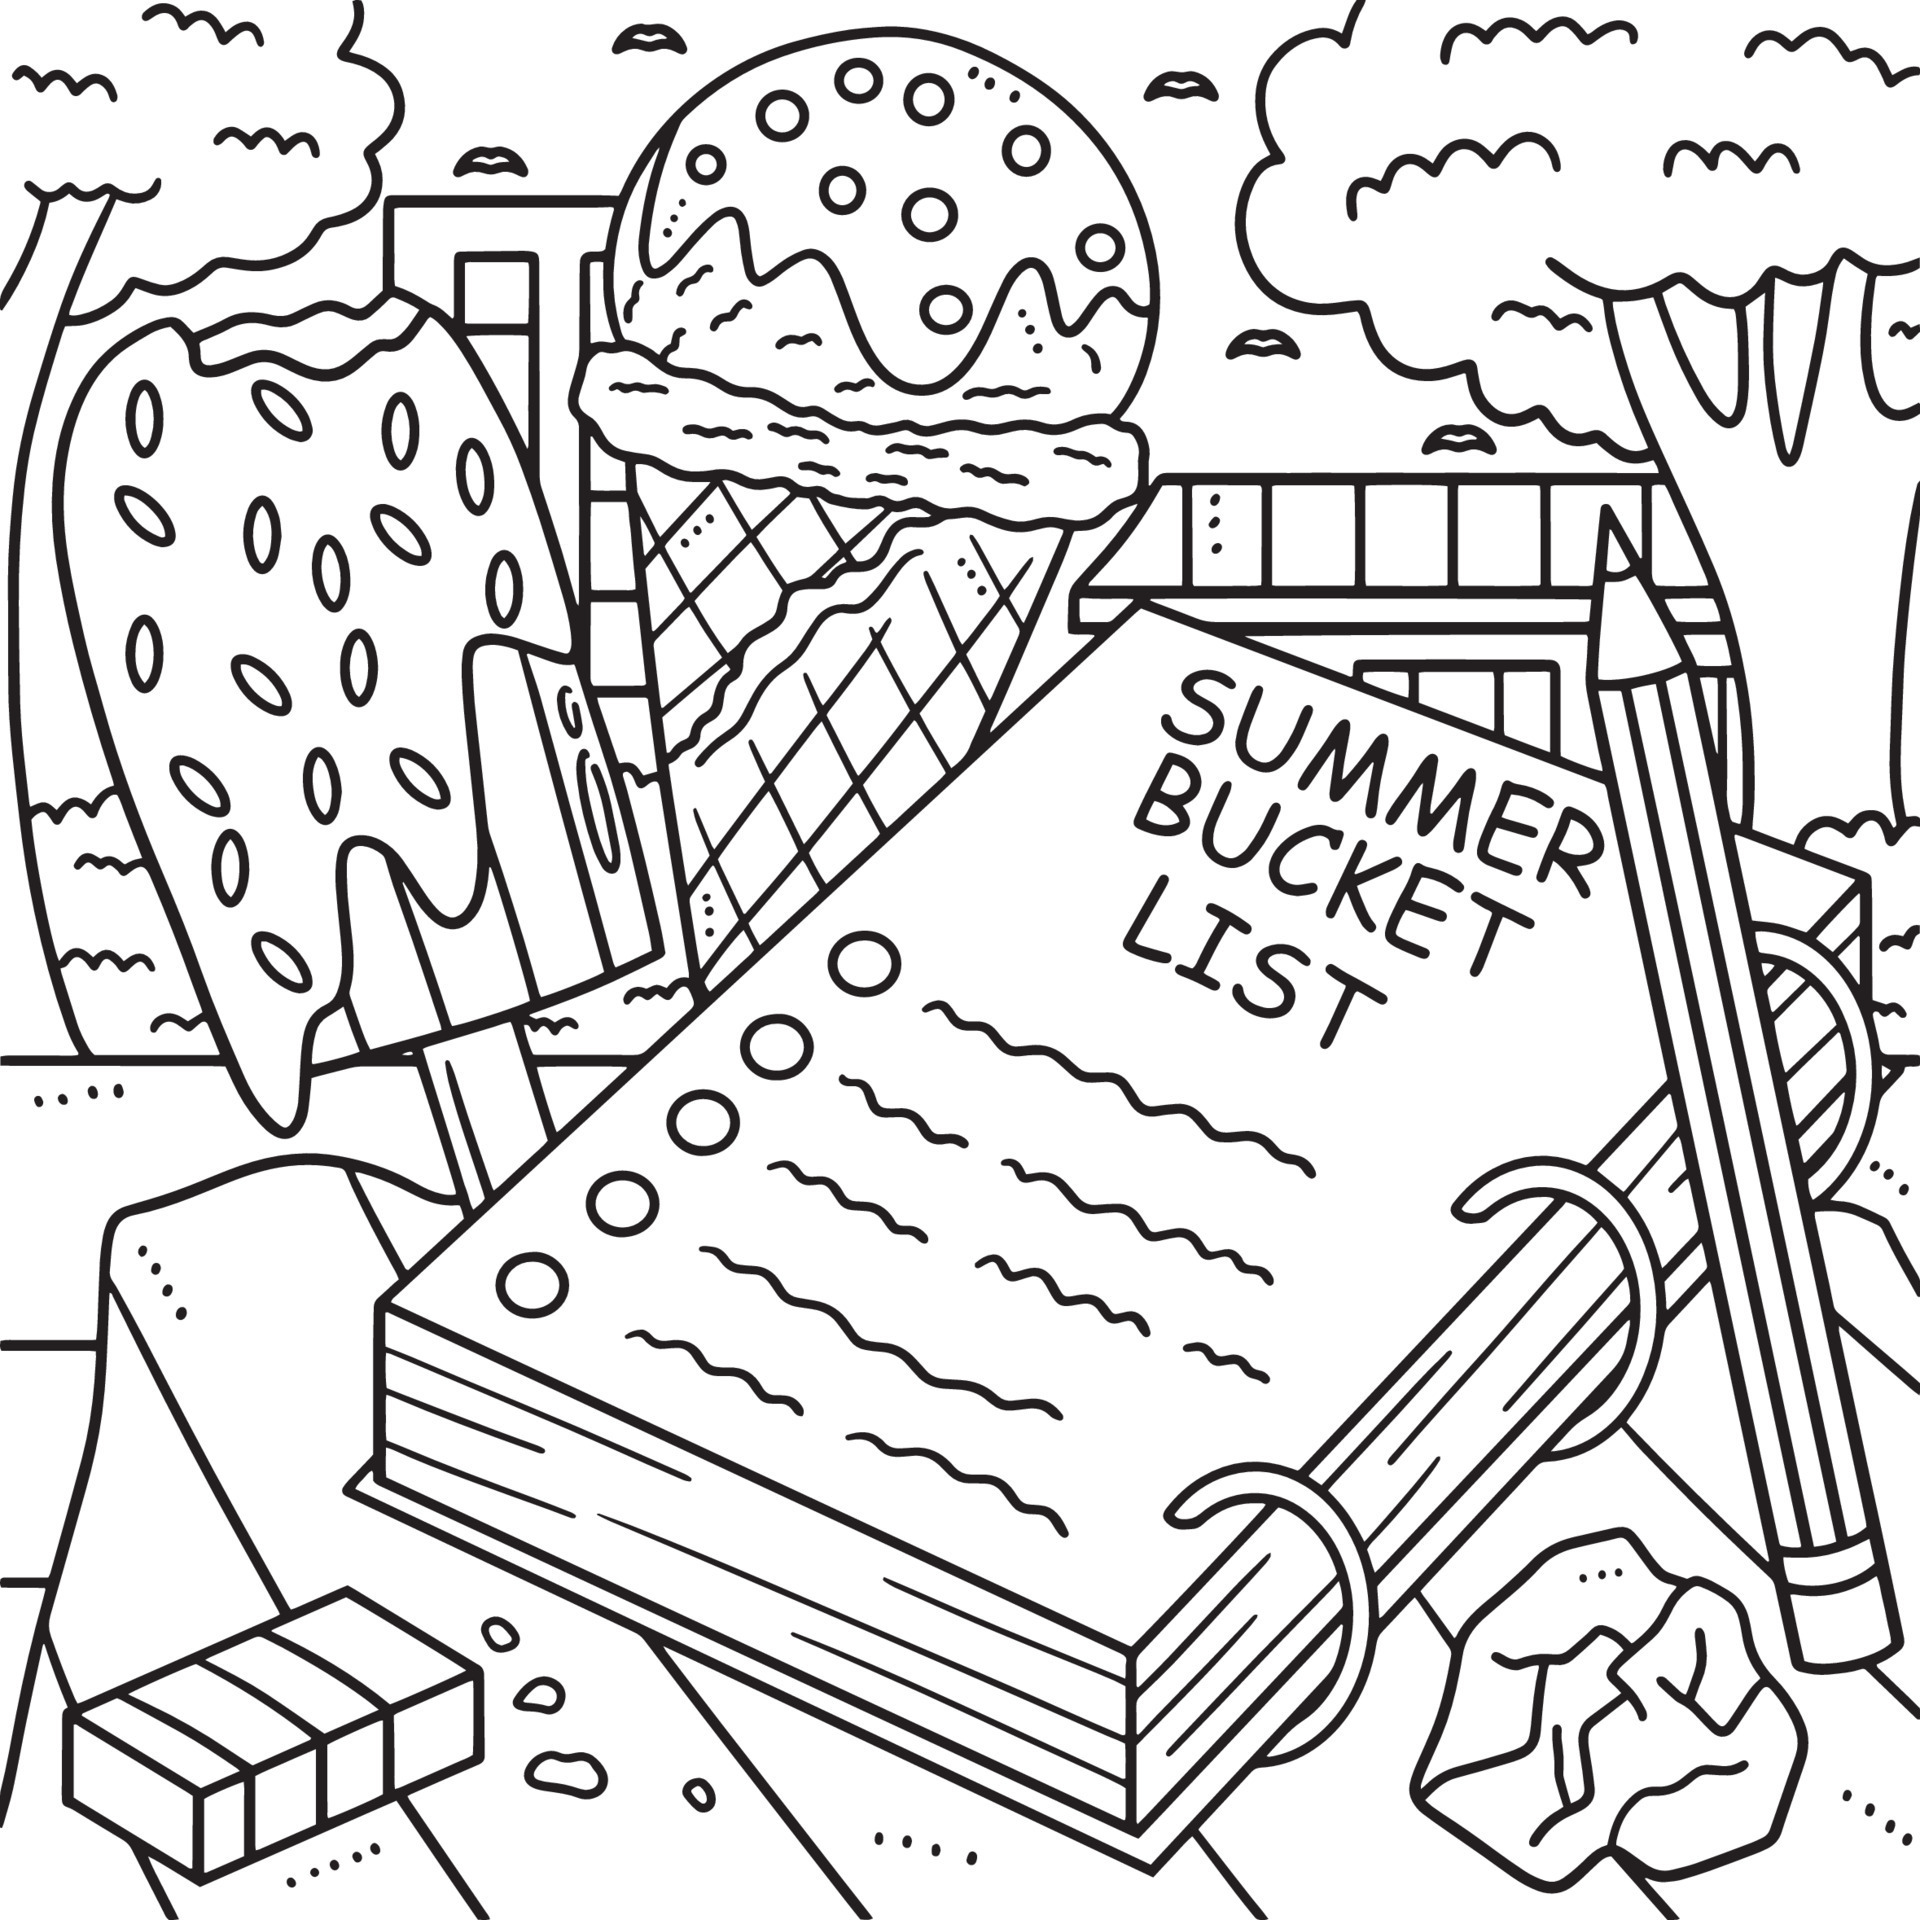 last-day-of-pre-k-summer-bucket-list-coloring-page-21501562-vector-art-at-vecteezy